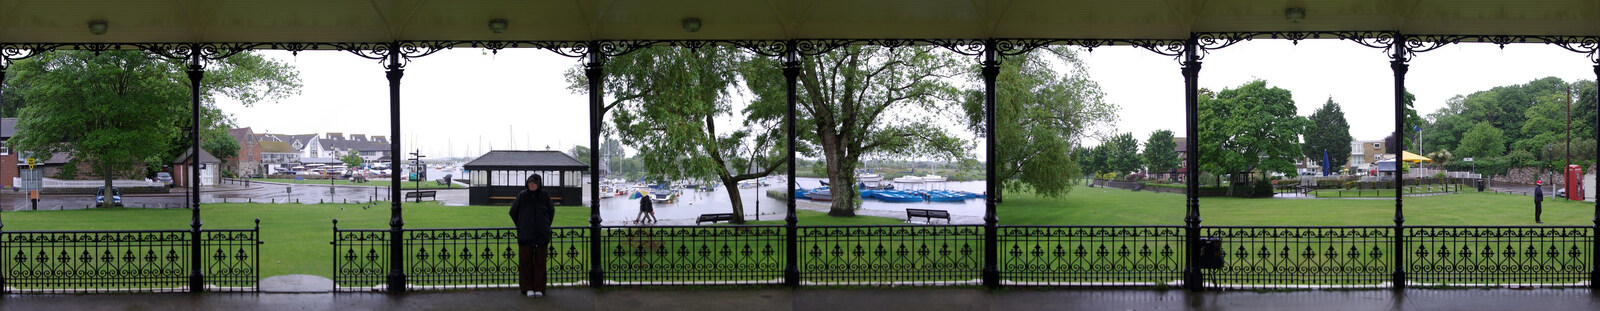 Nosher's Birthday Trip, New Milton, Hampshire - 26th May 2007: A panorama of the 8 views out of the octagonal bandstand down by the Quay at Christchurch